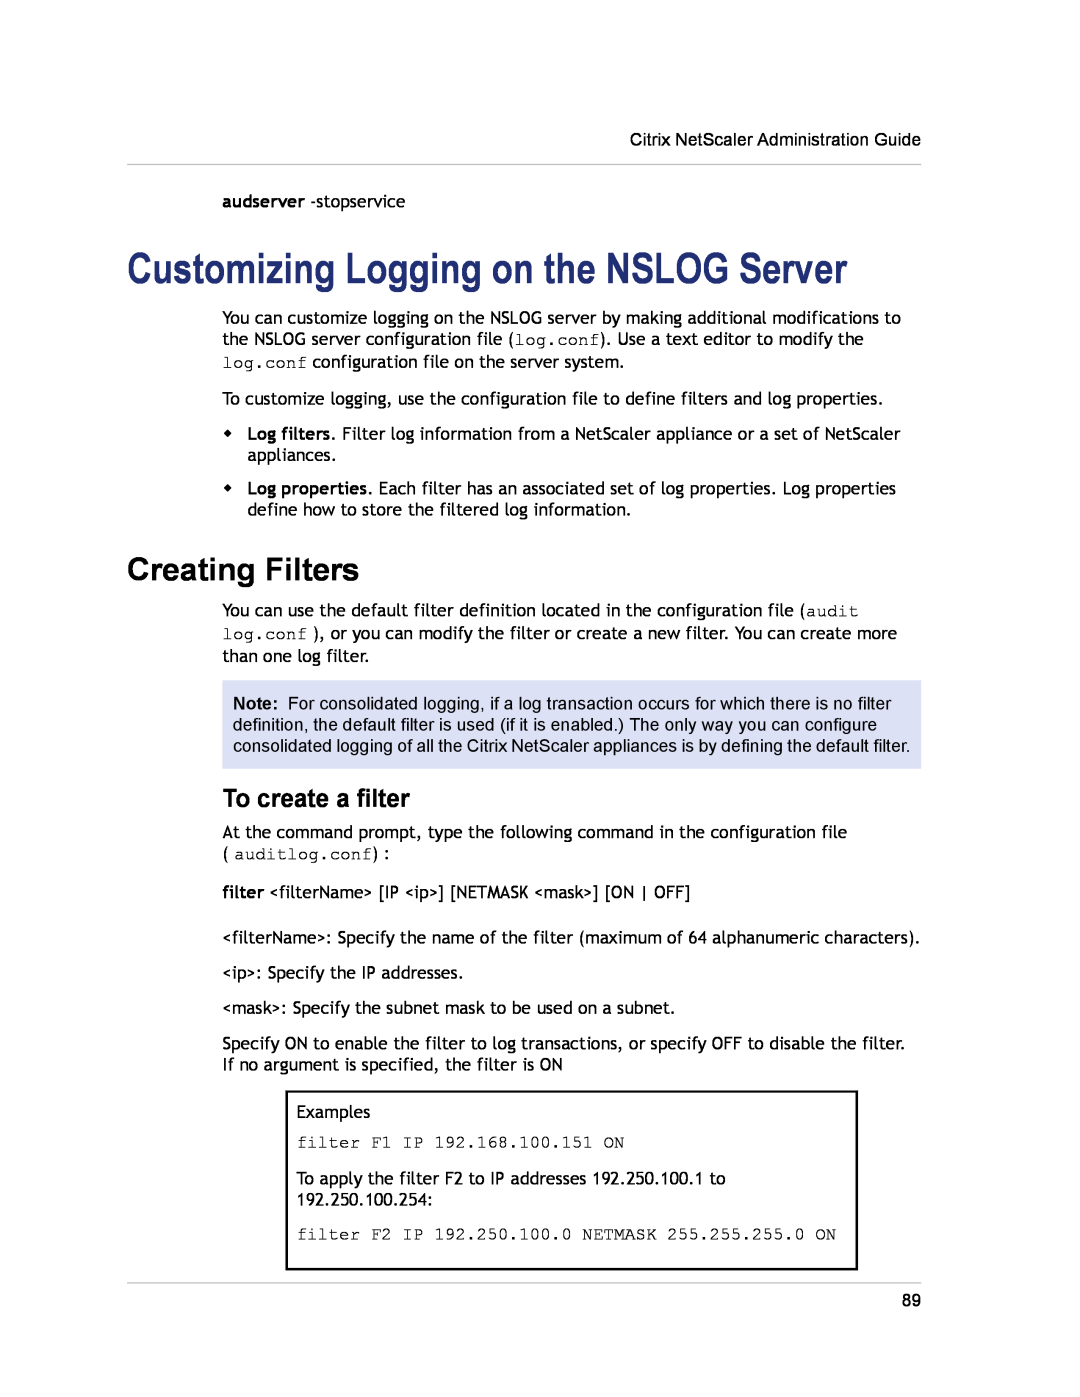 Citrix Systems CITRIX NETSCALER 9.3 manual Customizing Logging on the NSLOG Server, Creating Filters, To create a filter 